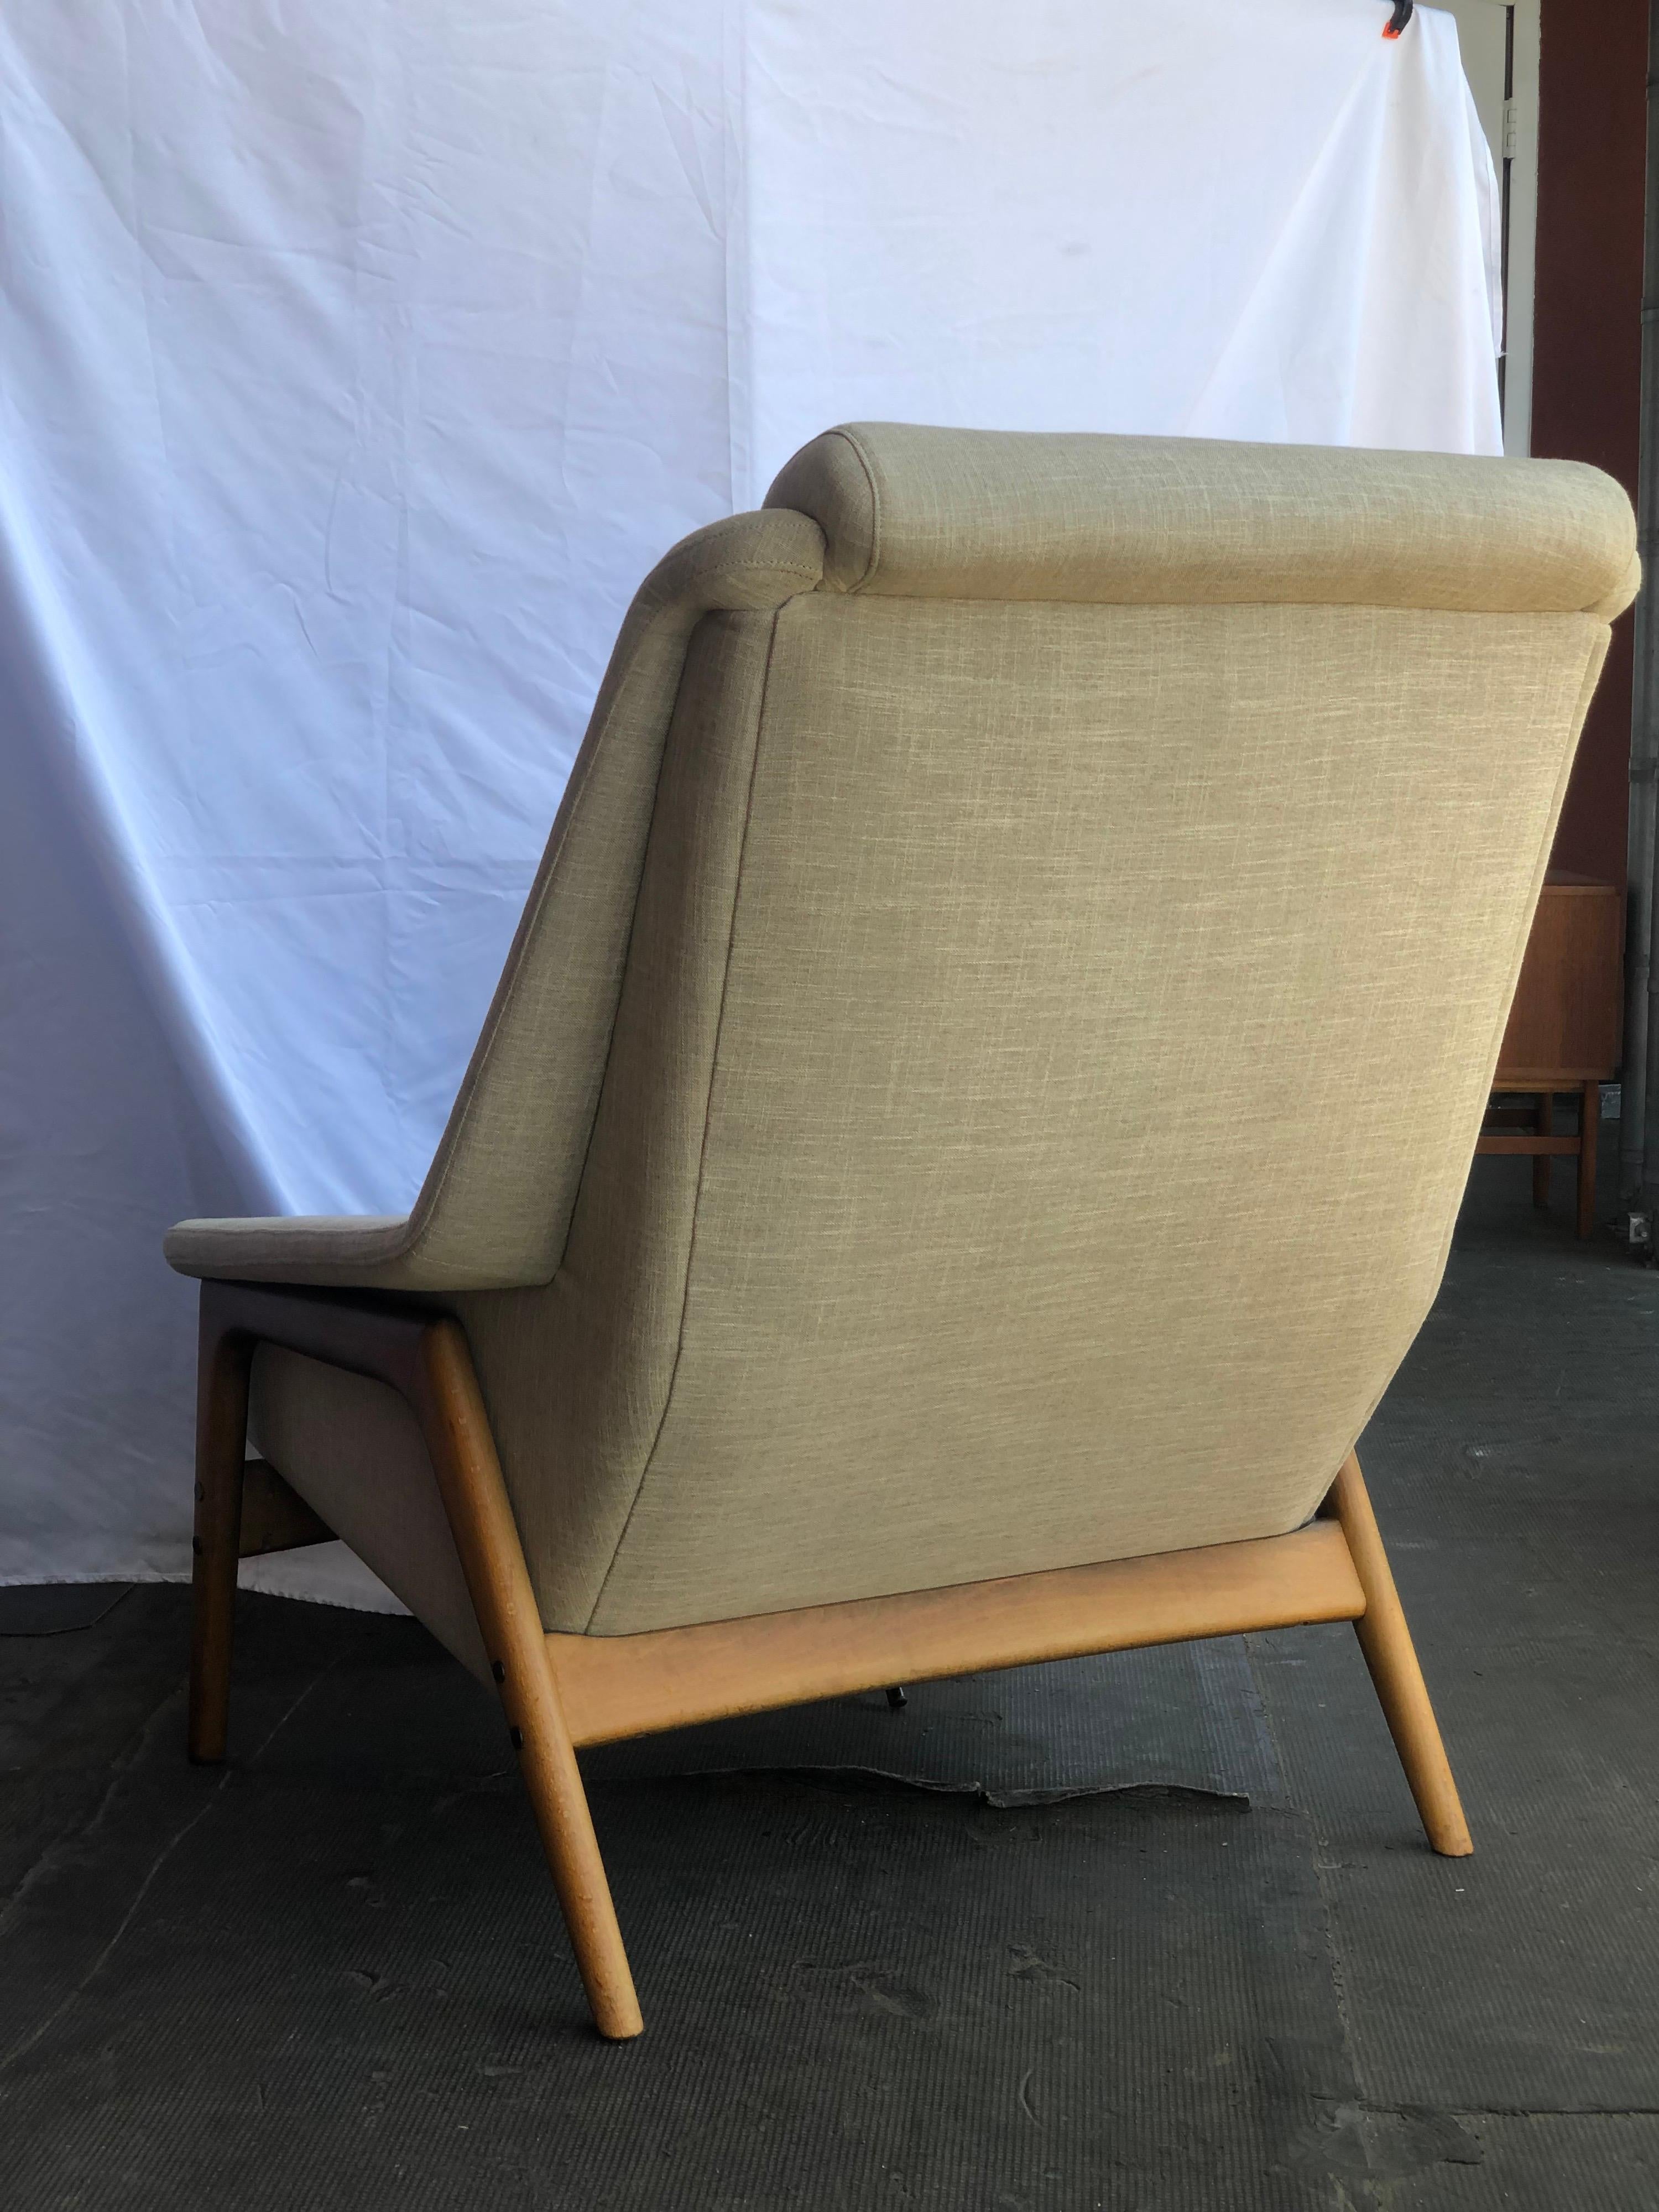 Vintage Mid-Century Modern Sofa Lounge Chair by Folke Ohlsson for DUX In Good Condition For Sale In Seattle, WA